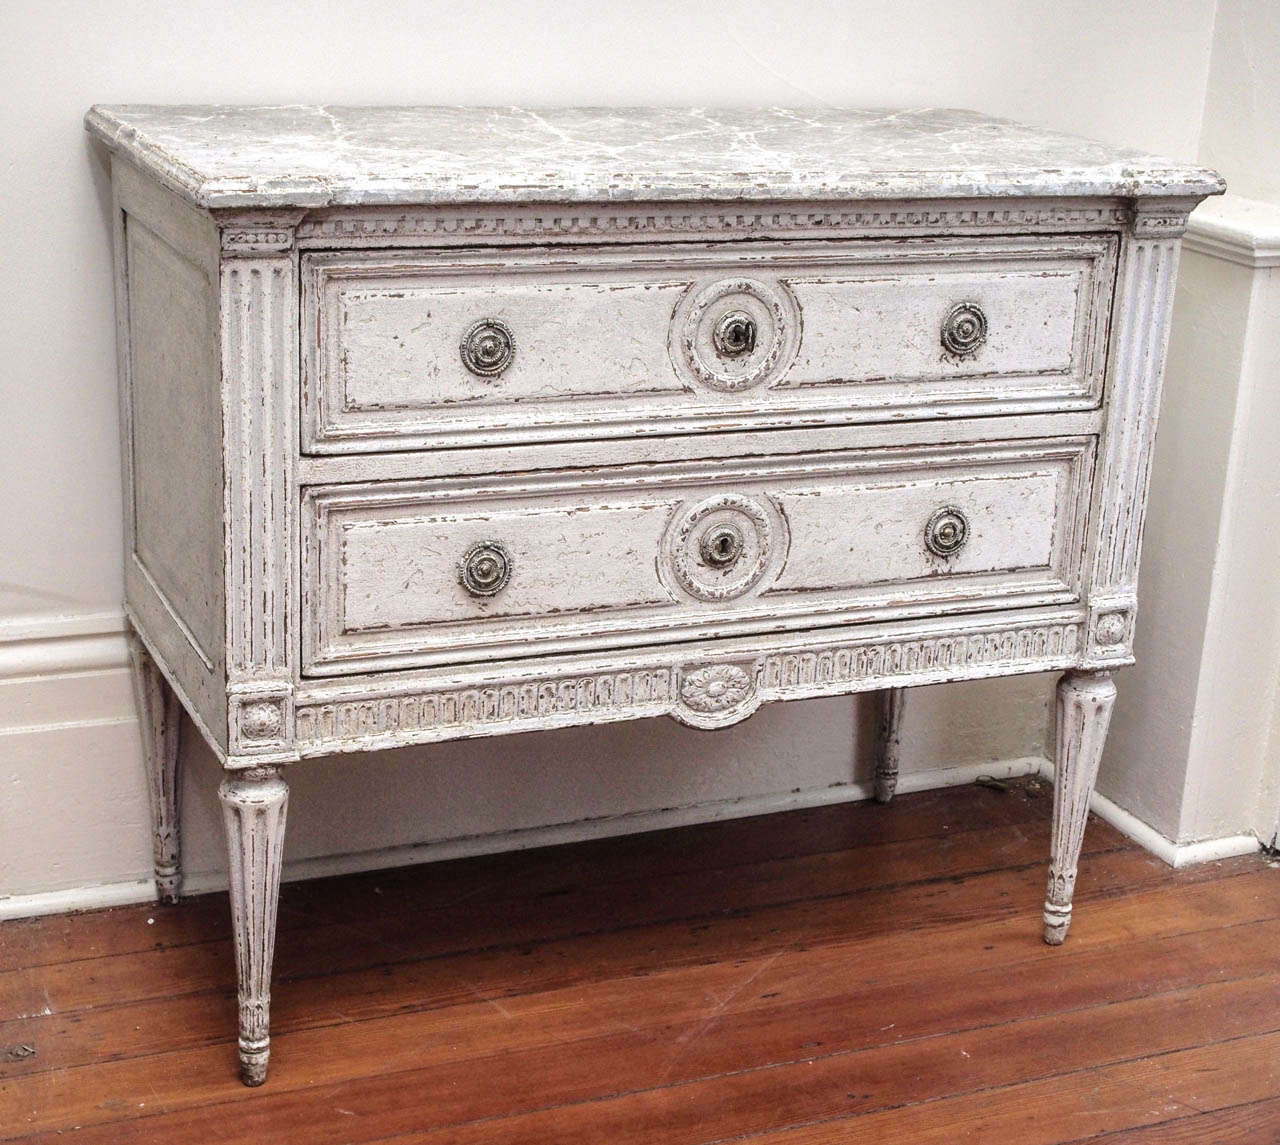 Pair of 19th century painted commodes . Louis XVI style with a marble faux finish top and 2 drawers.